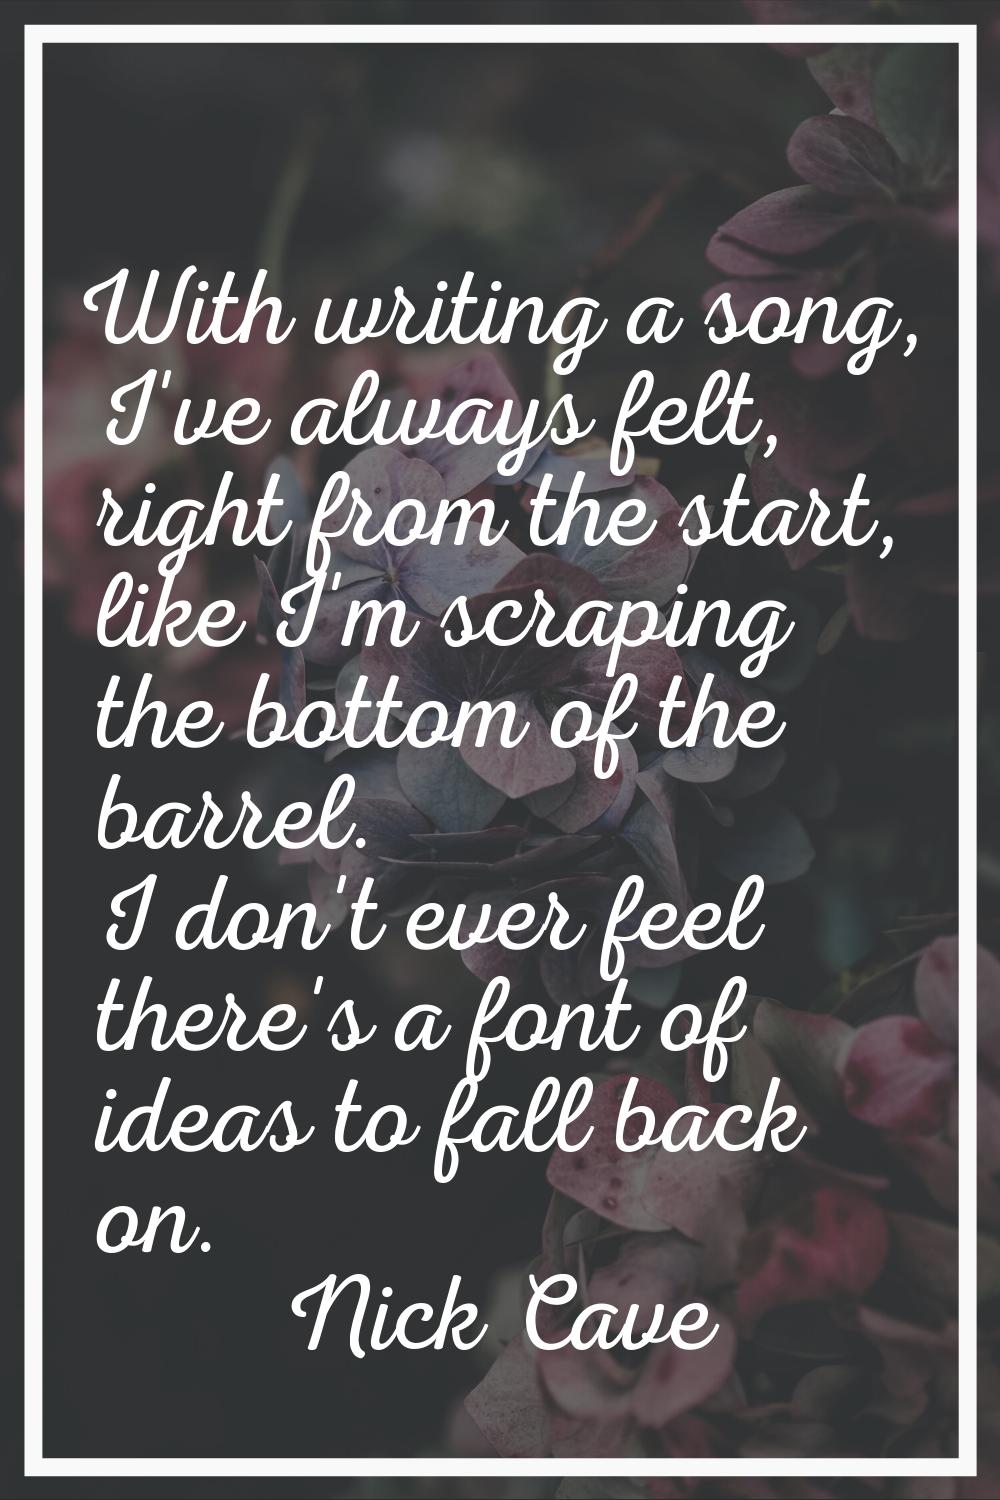 With writing a song, I've always felt, right from the start, like I'm scraping the bottom of the ba